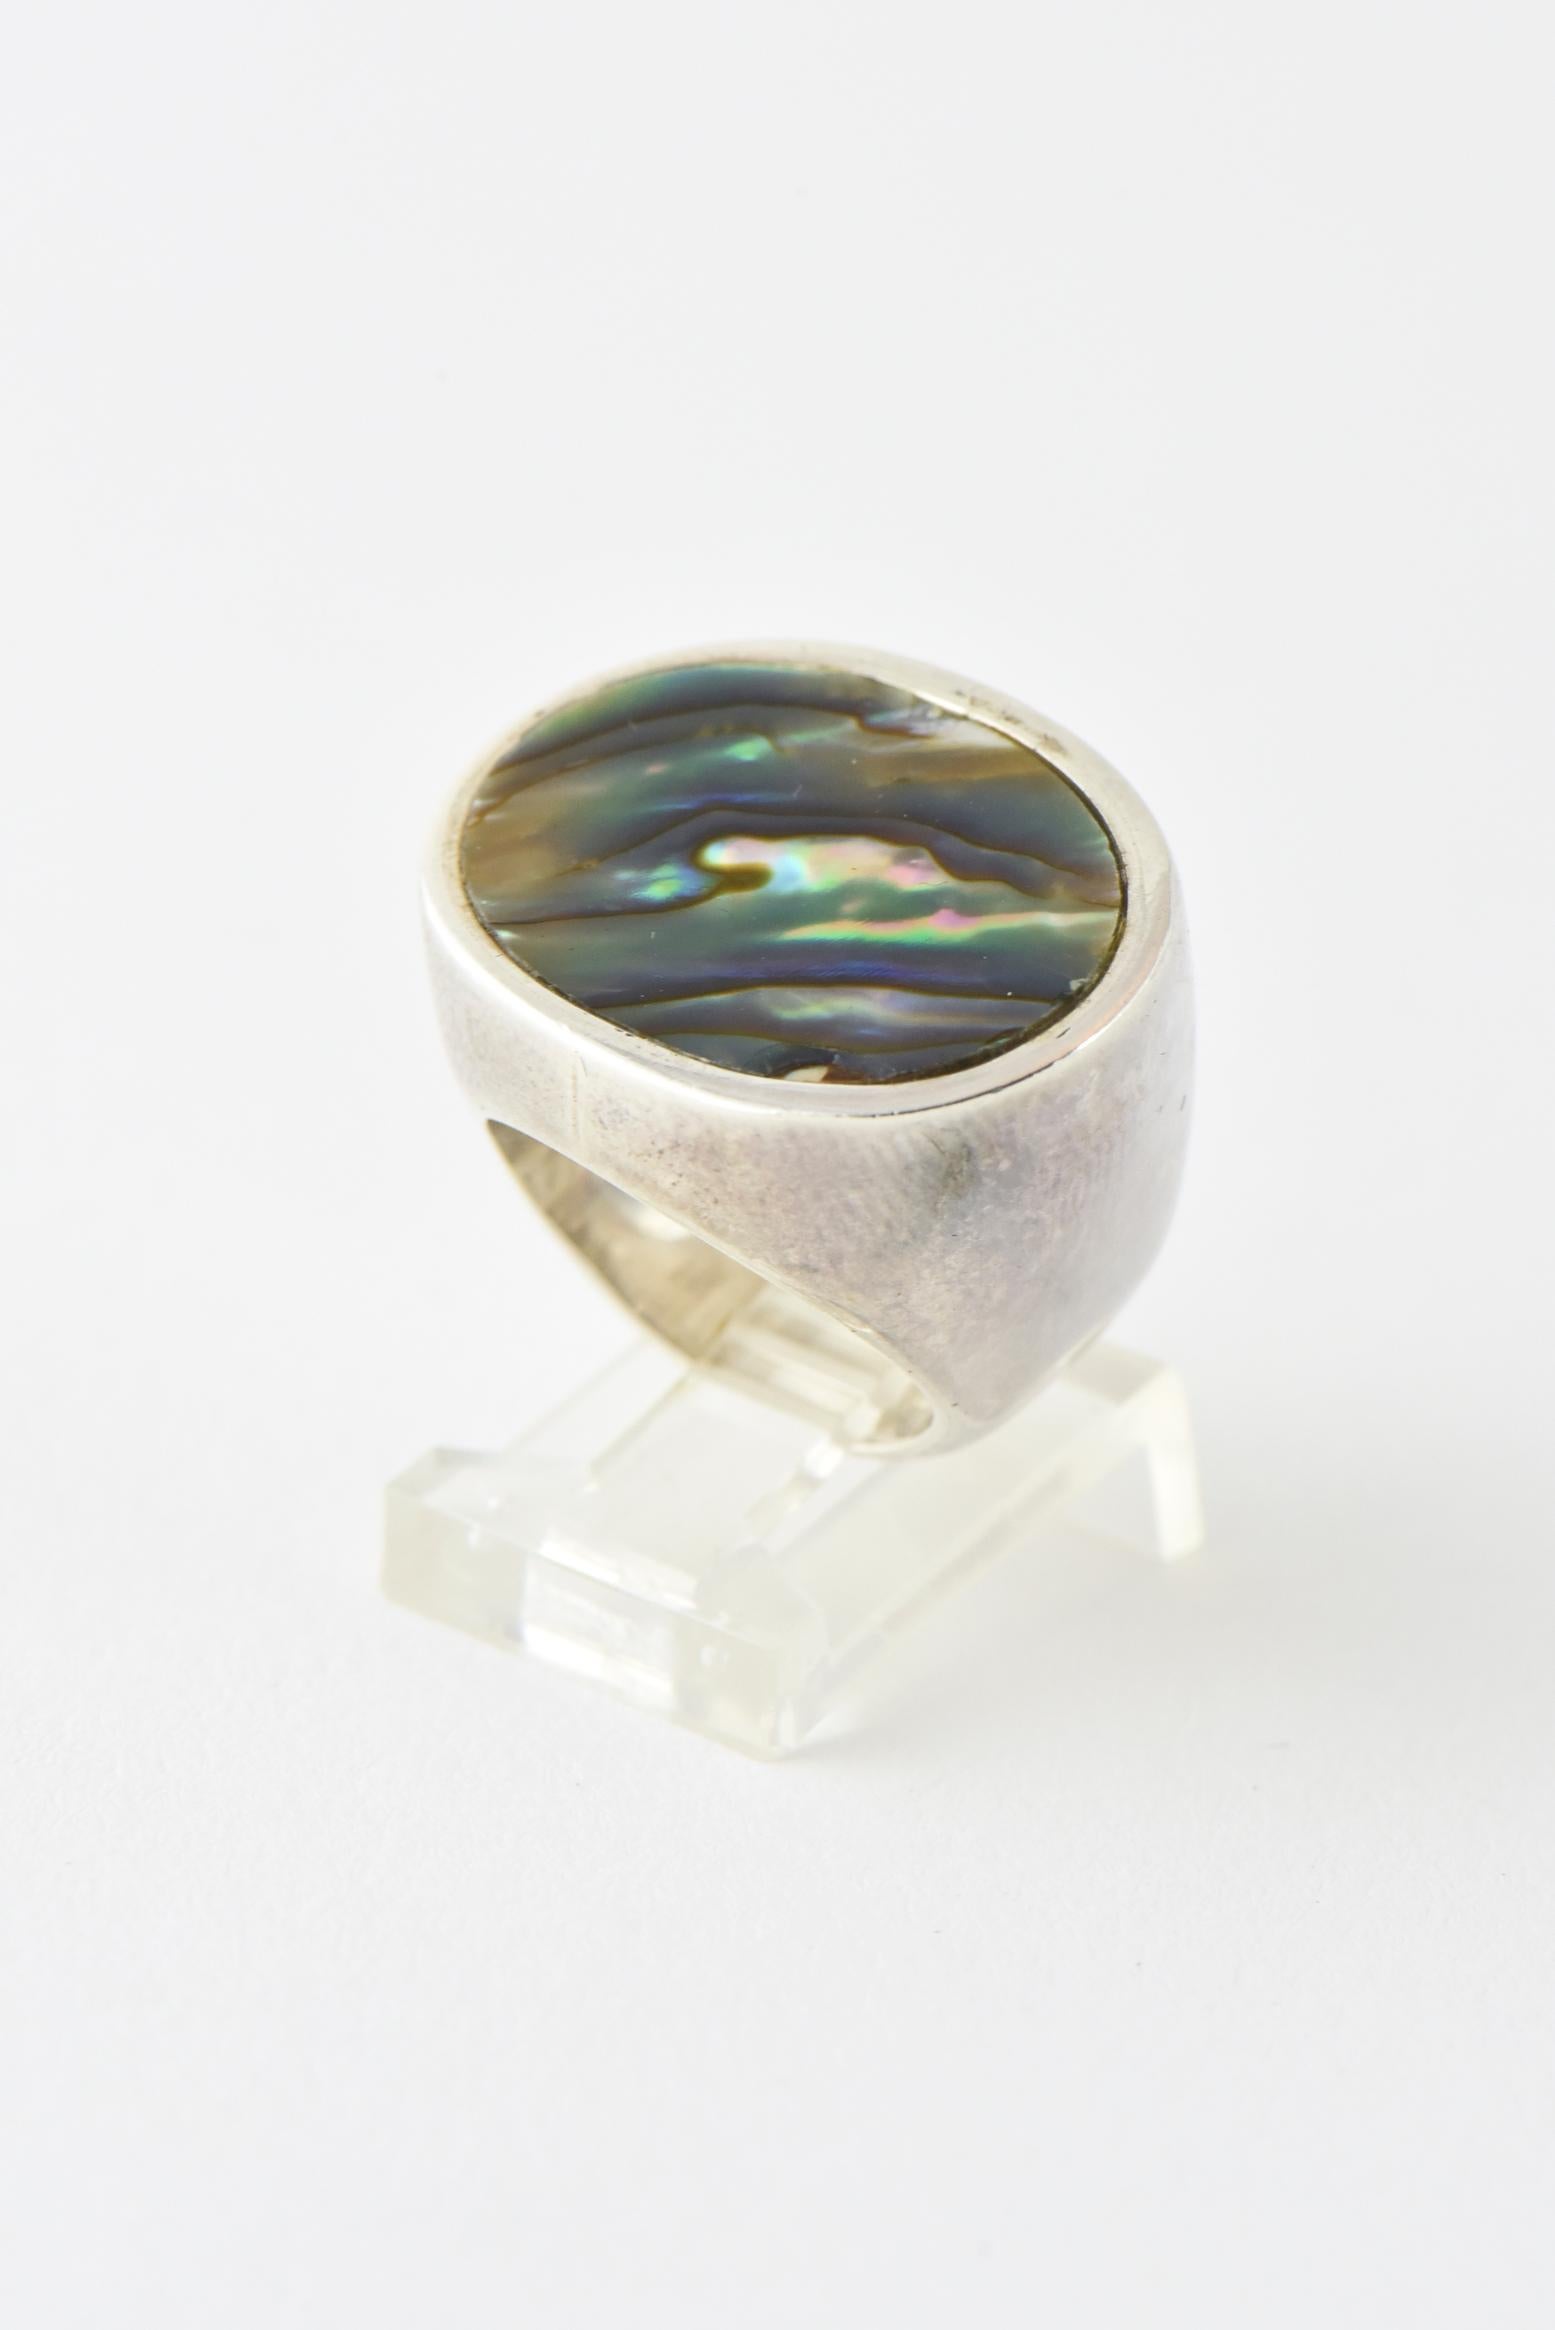 abalone rings age